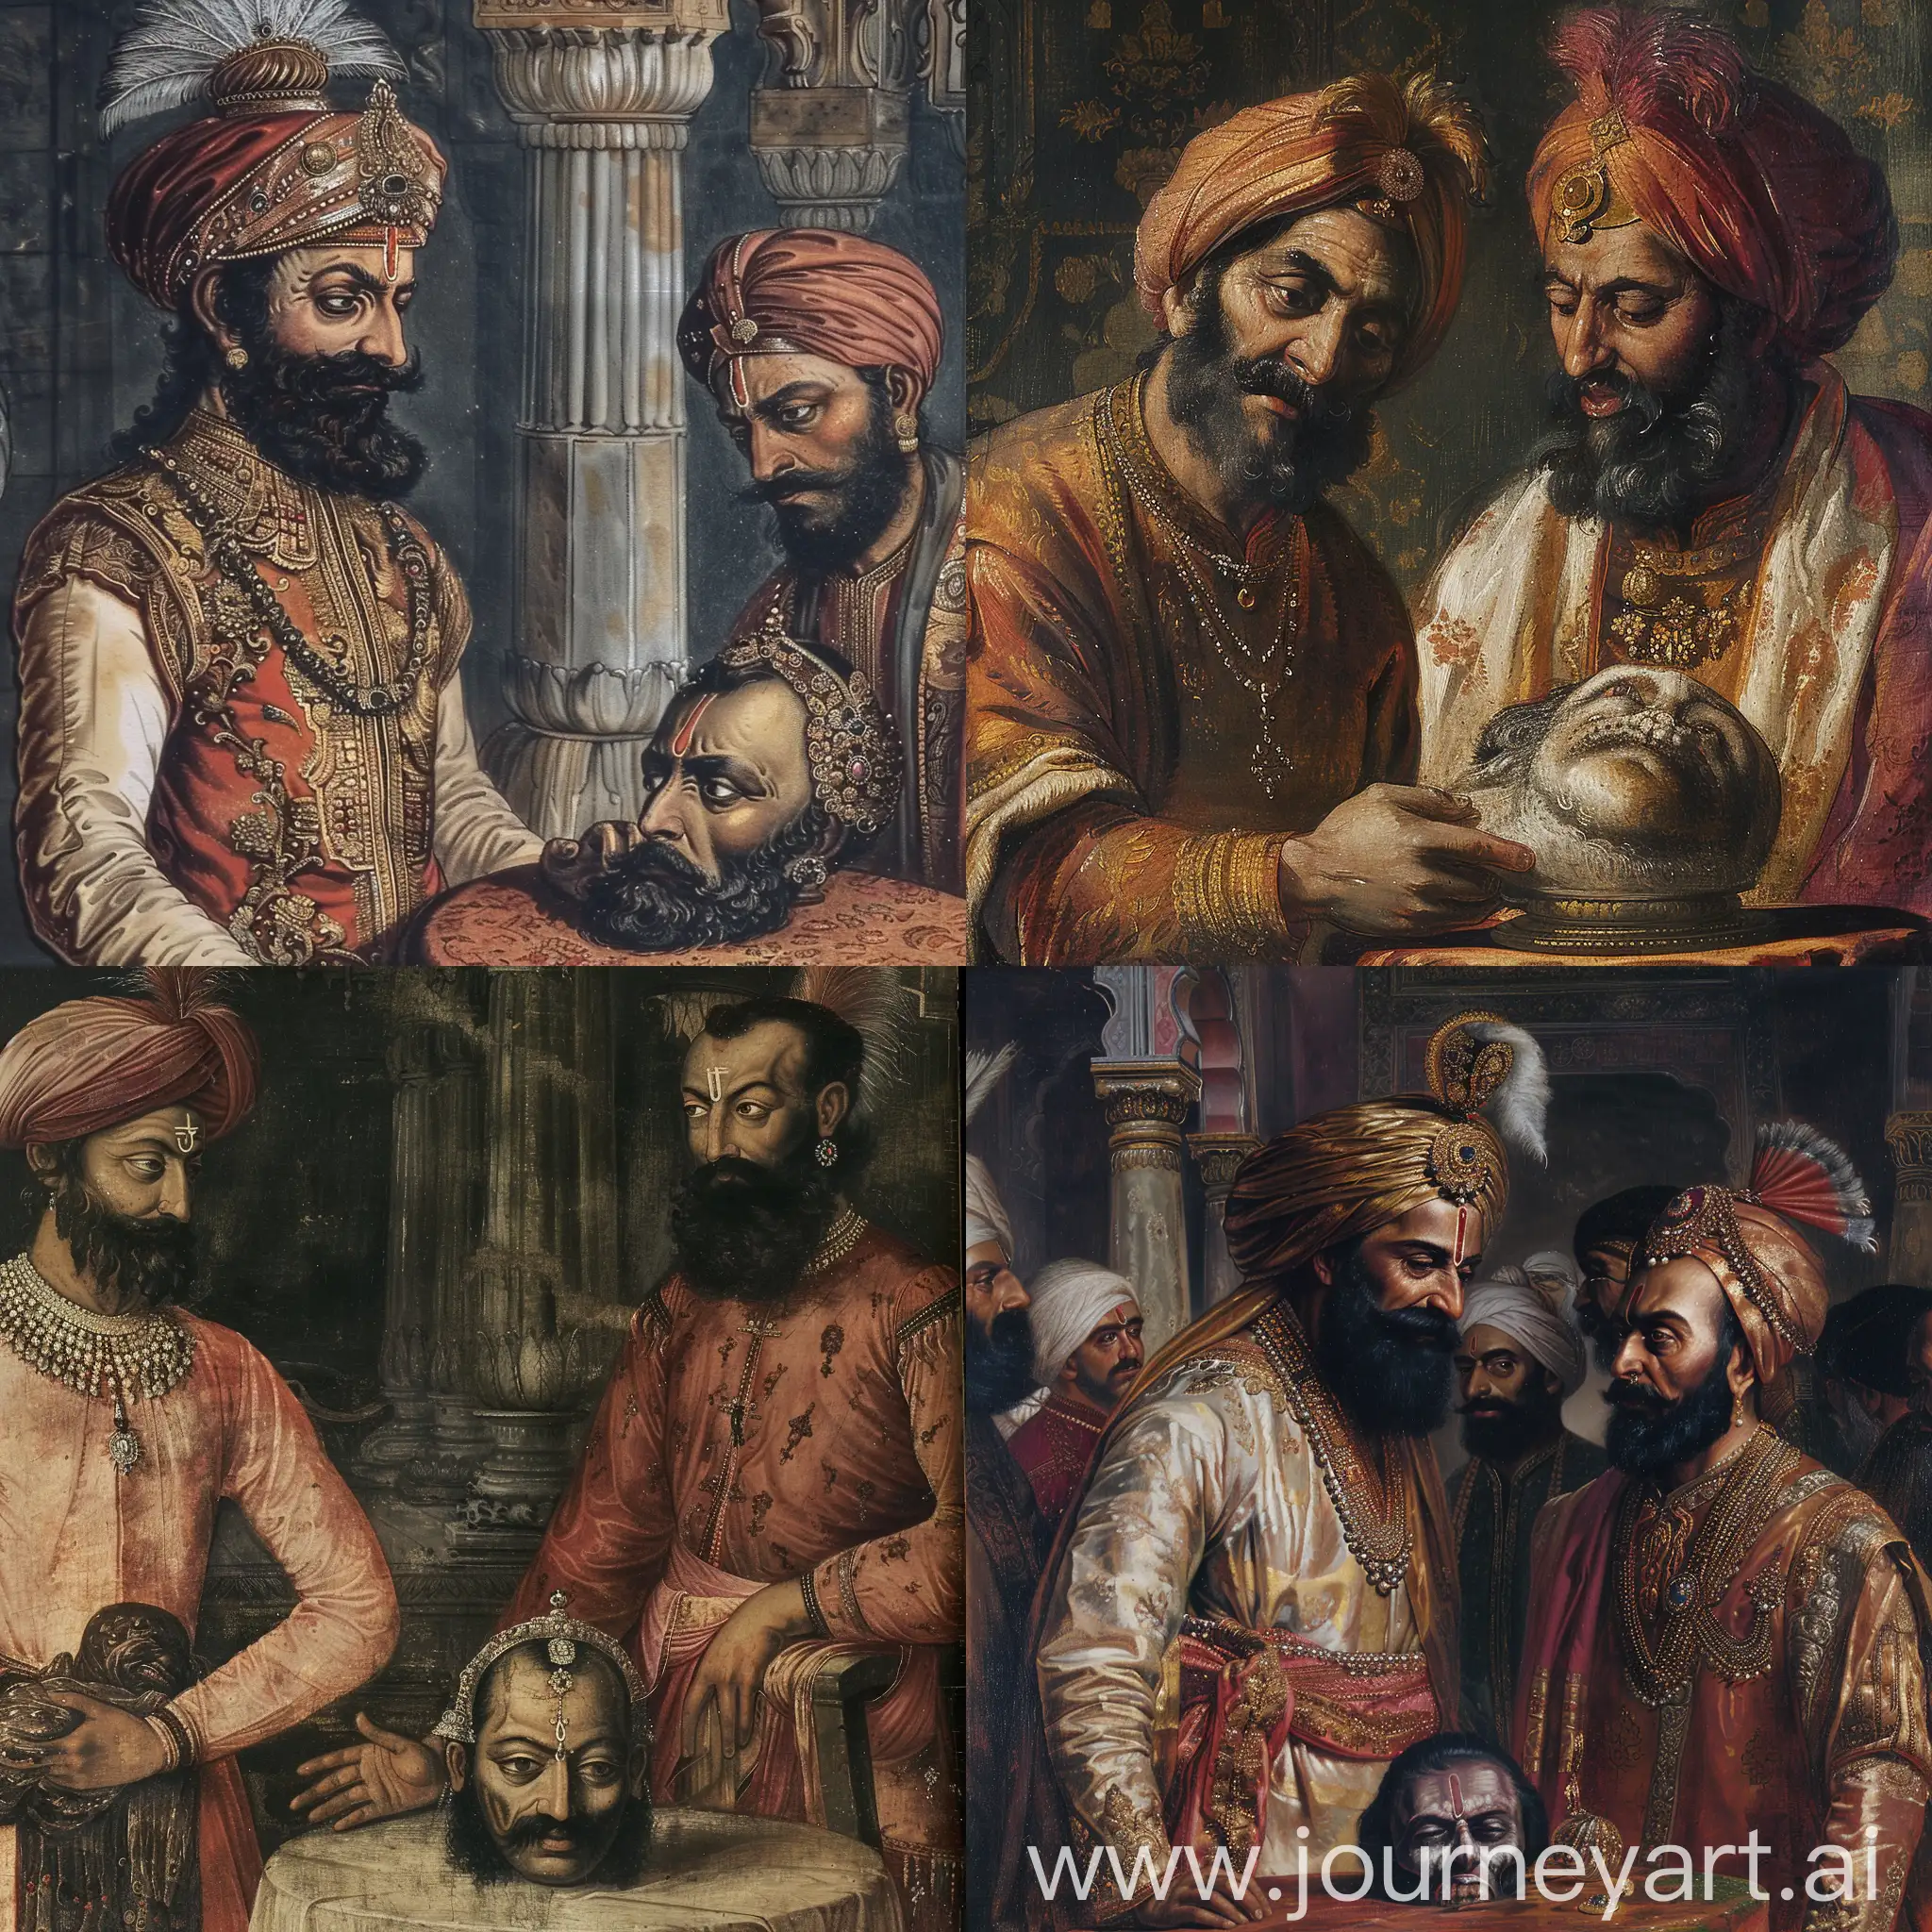 year is 1700 CE. Imagine cruel mughal ruler Aurangzeb examining the decapitated head of another mughal angrily. The head is kept on a table in front of Aurangzeb.